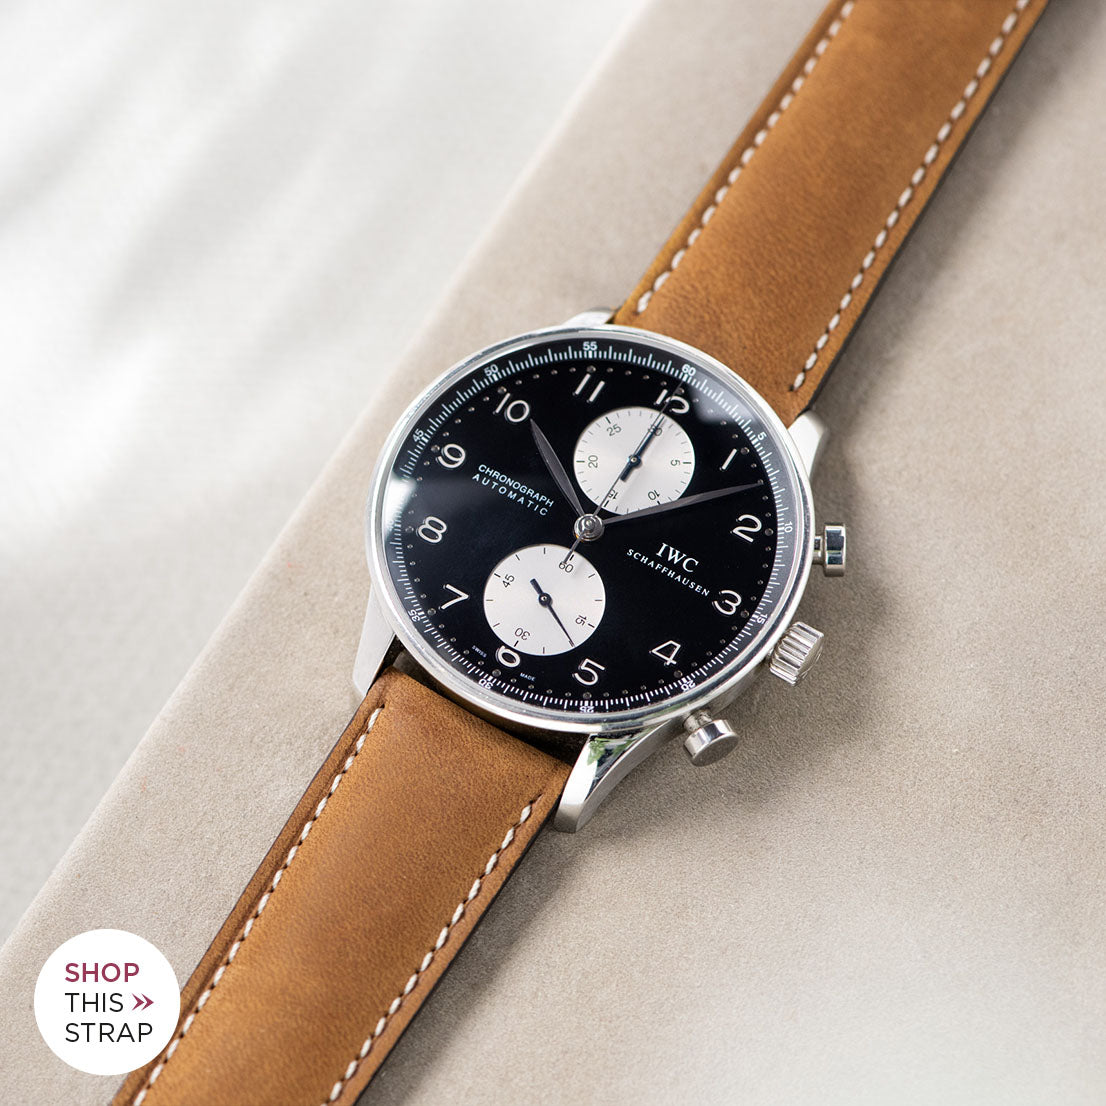 Bulang and Sons_Strap Guide_IWC-Portugieser_Mountain Brown Leather Watch Strap